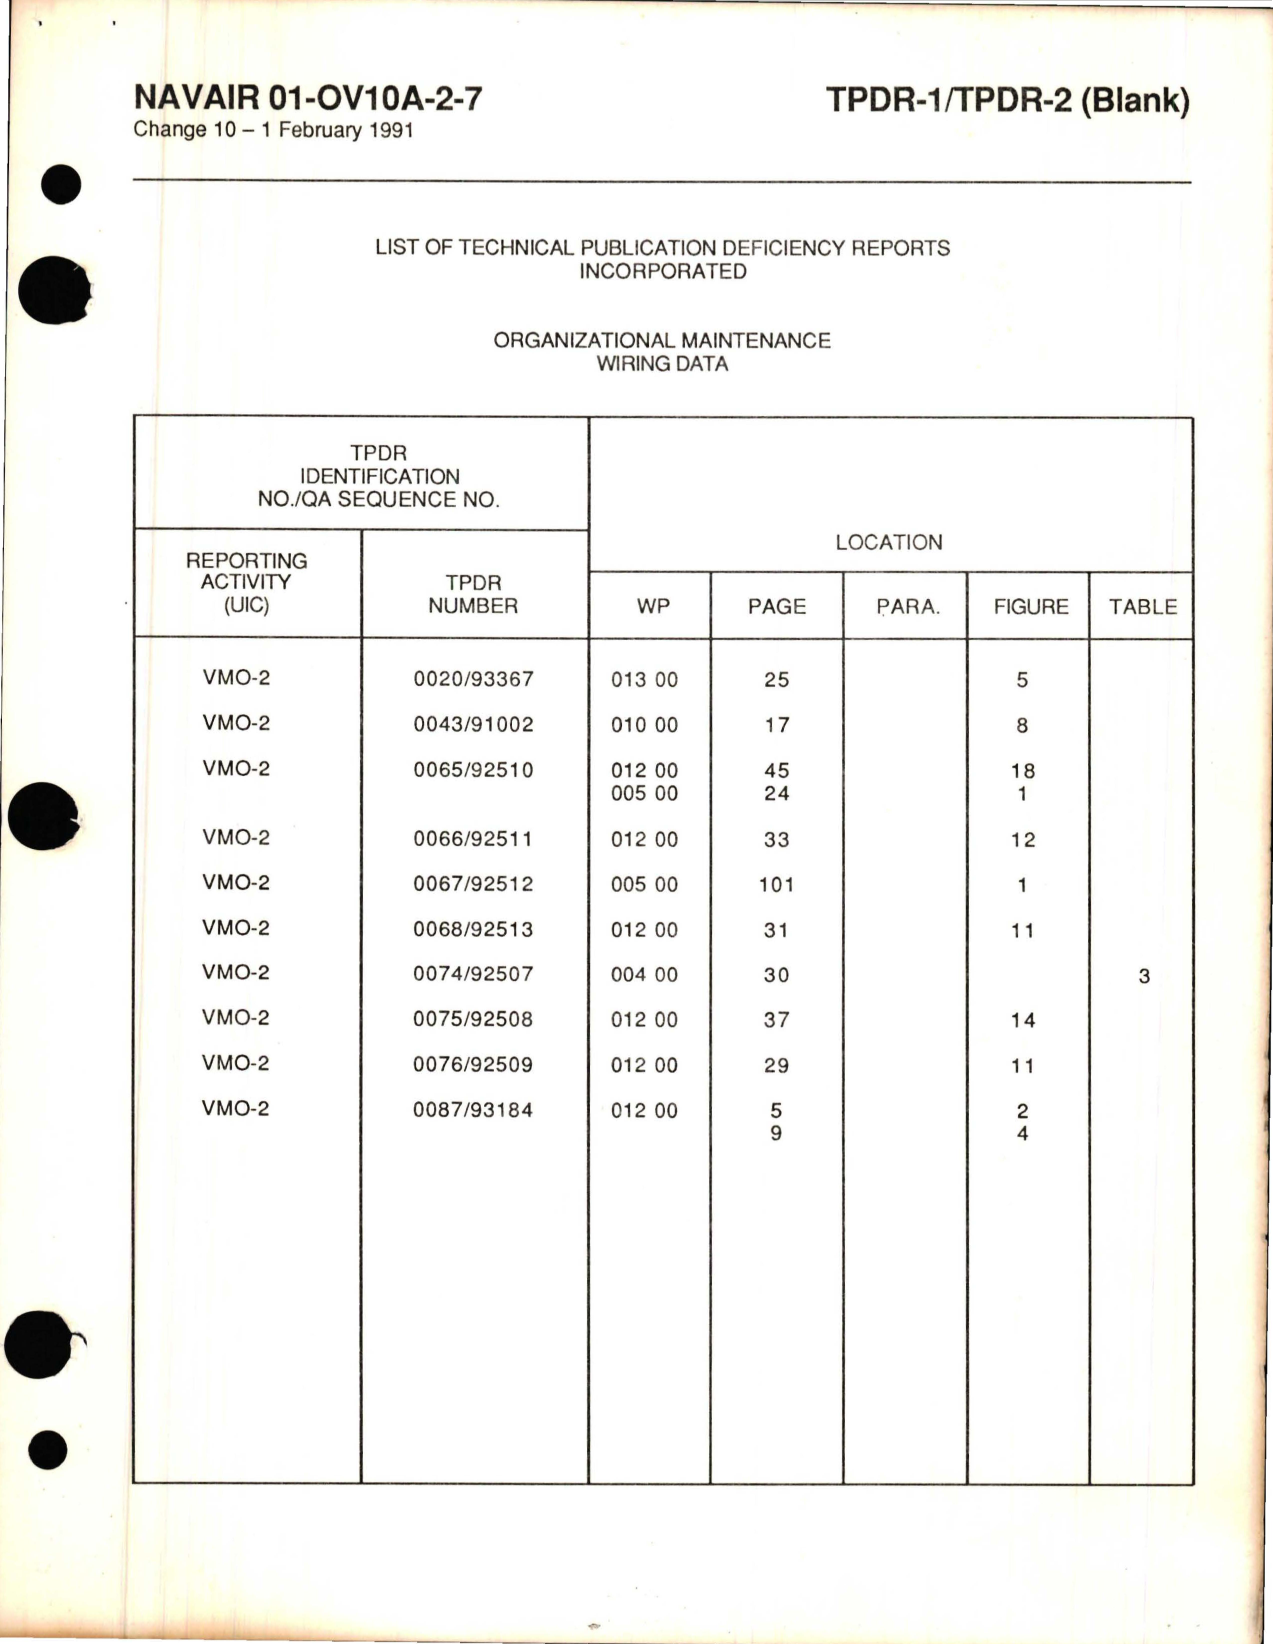 Sample page 7 from AirCorps Library document: Organizational Maintenance for Wiring Data for OV-10A